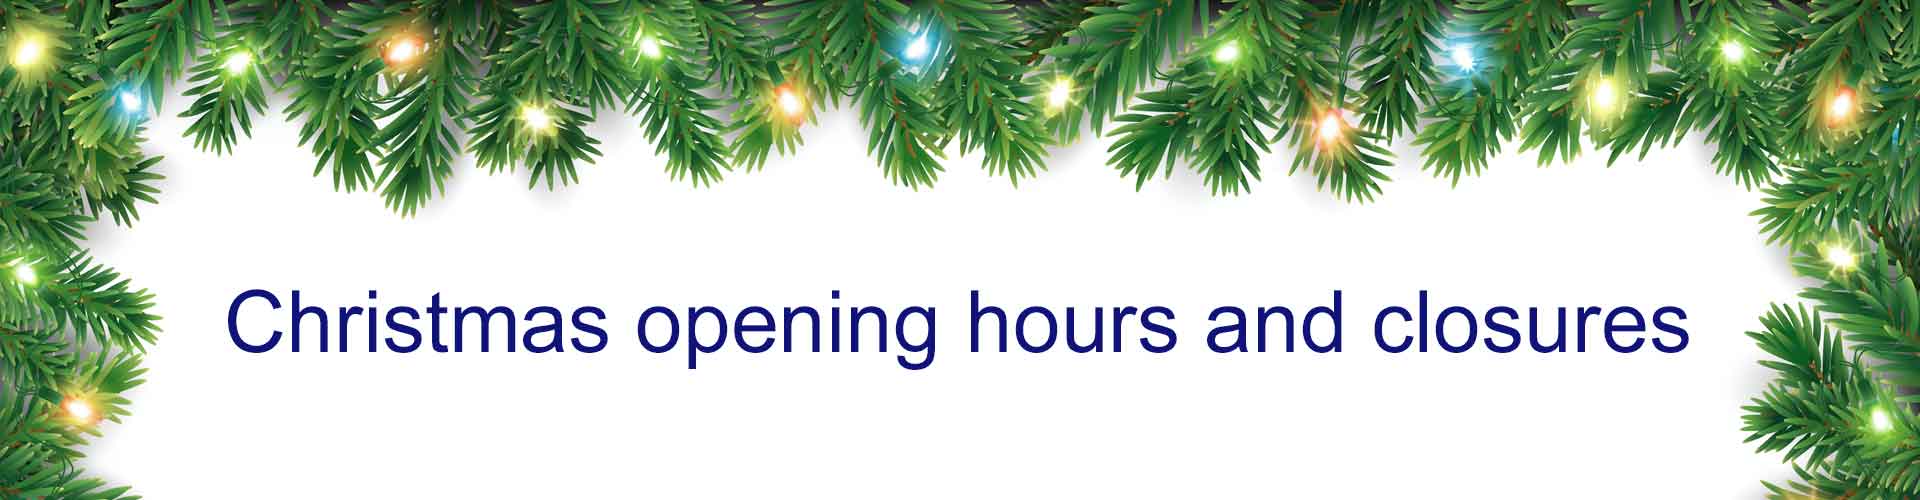 Christmas opening hours and closures